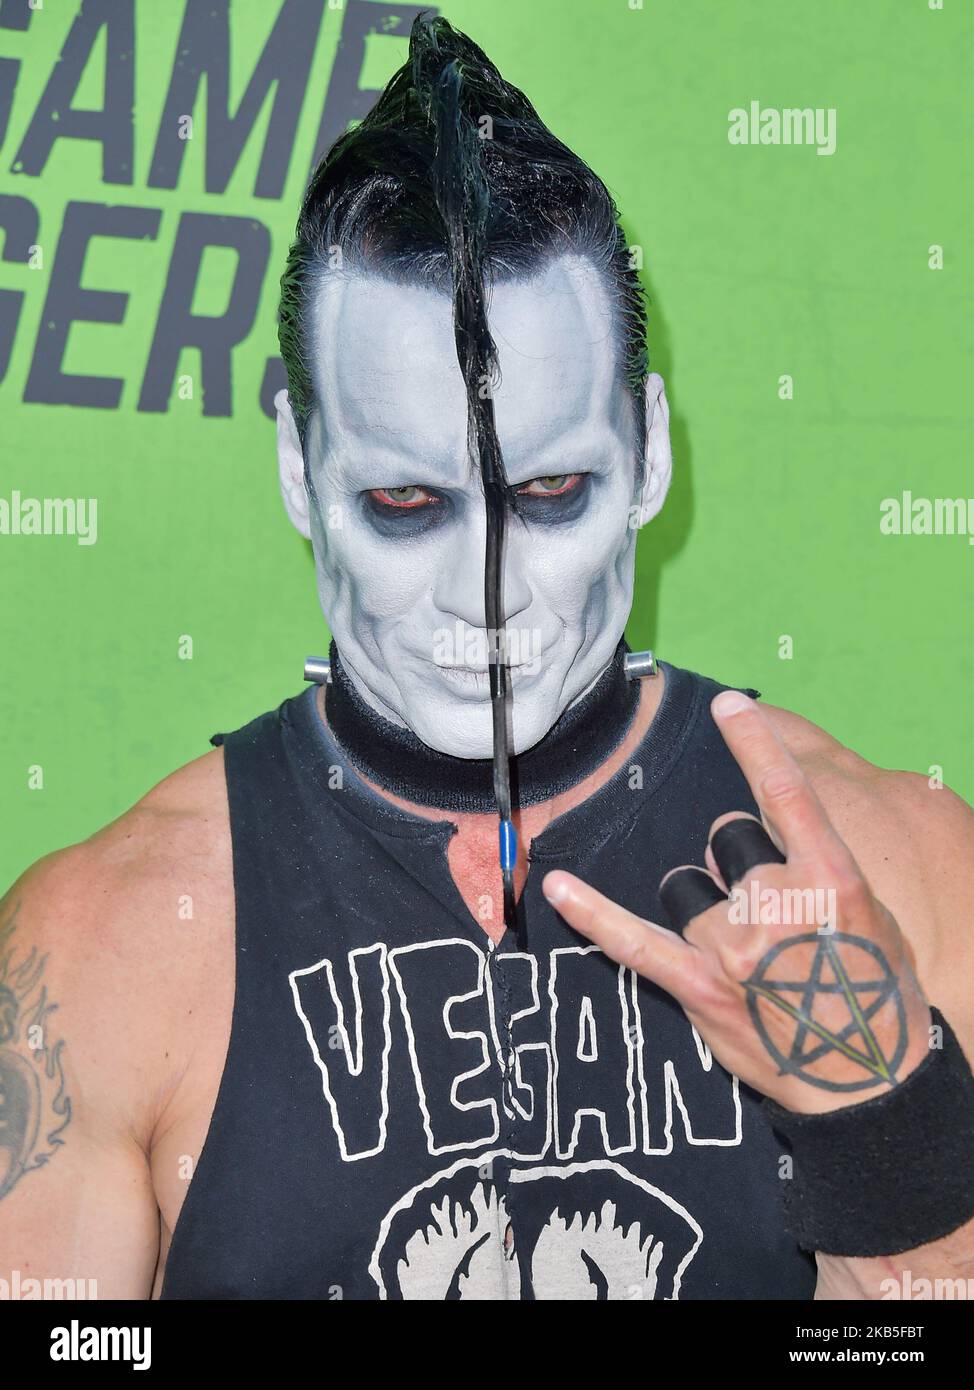 HOLLYWOOD, LOS ANGELES, CALIFORNIA, USA - SEPTEMBER 05: Doyle Wolfgang von Frankenstein arrives at the Los Angeles Premiere Of 'The Game Changers' held at ArcLight Cinemas Hollywood on September 5, 2019 in Hollywood, Los Angeles, California, United States. (Photo by Image Press Agency/NurPhoto) Stock Photo